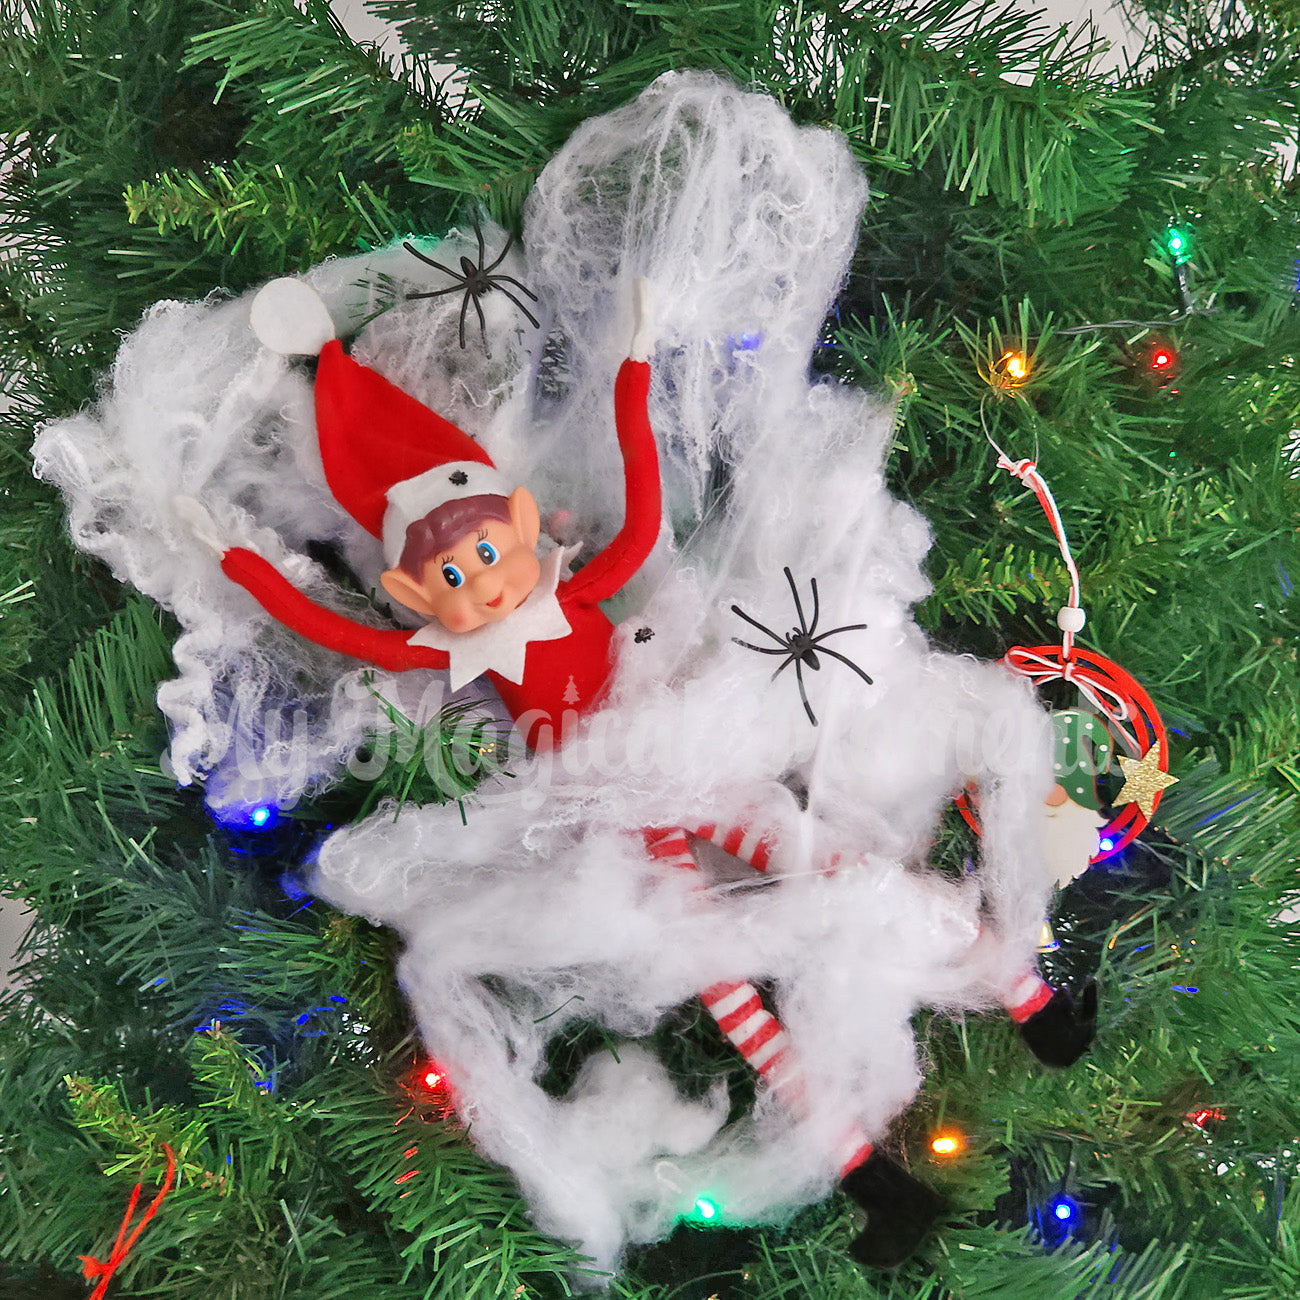 Elves behavin badly stuck in spider web on the Christmas tree. Miniature fly props are also caught in the web